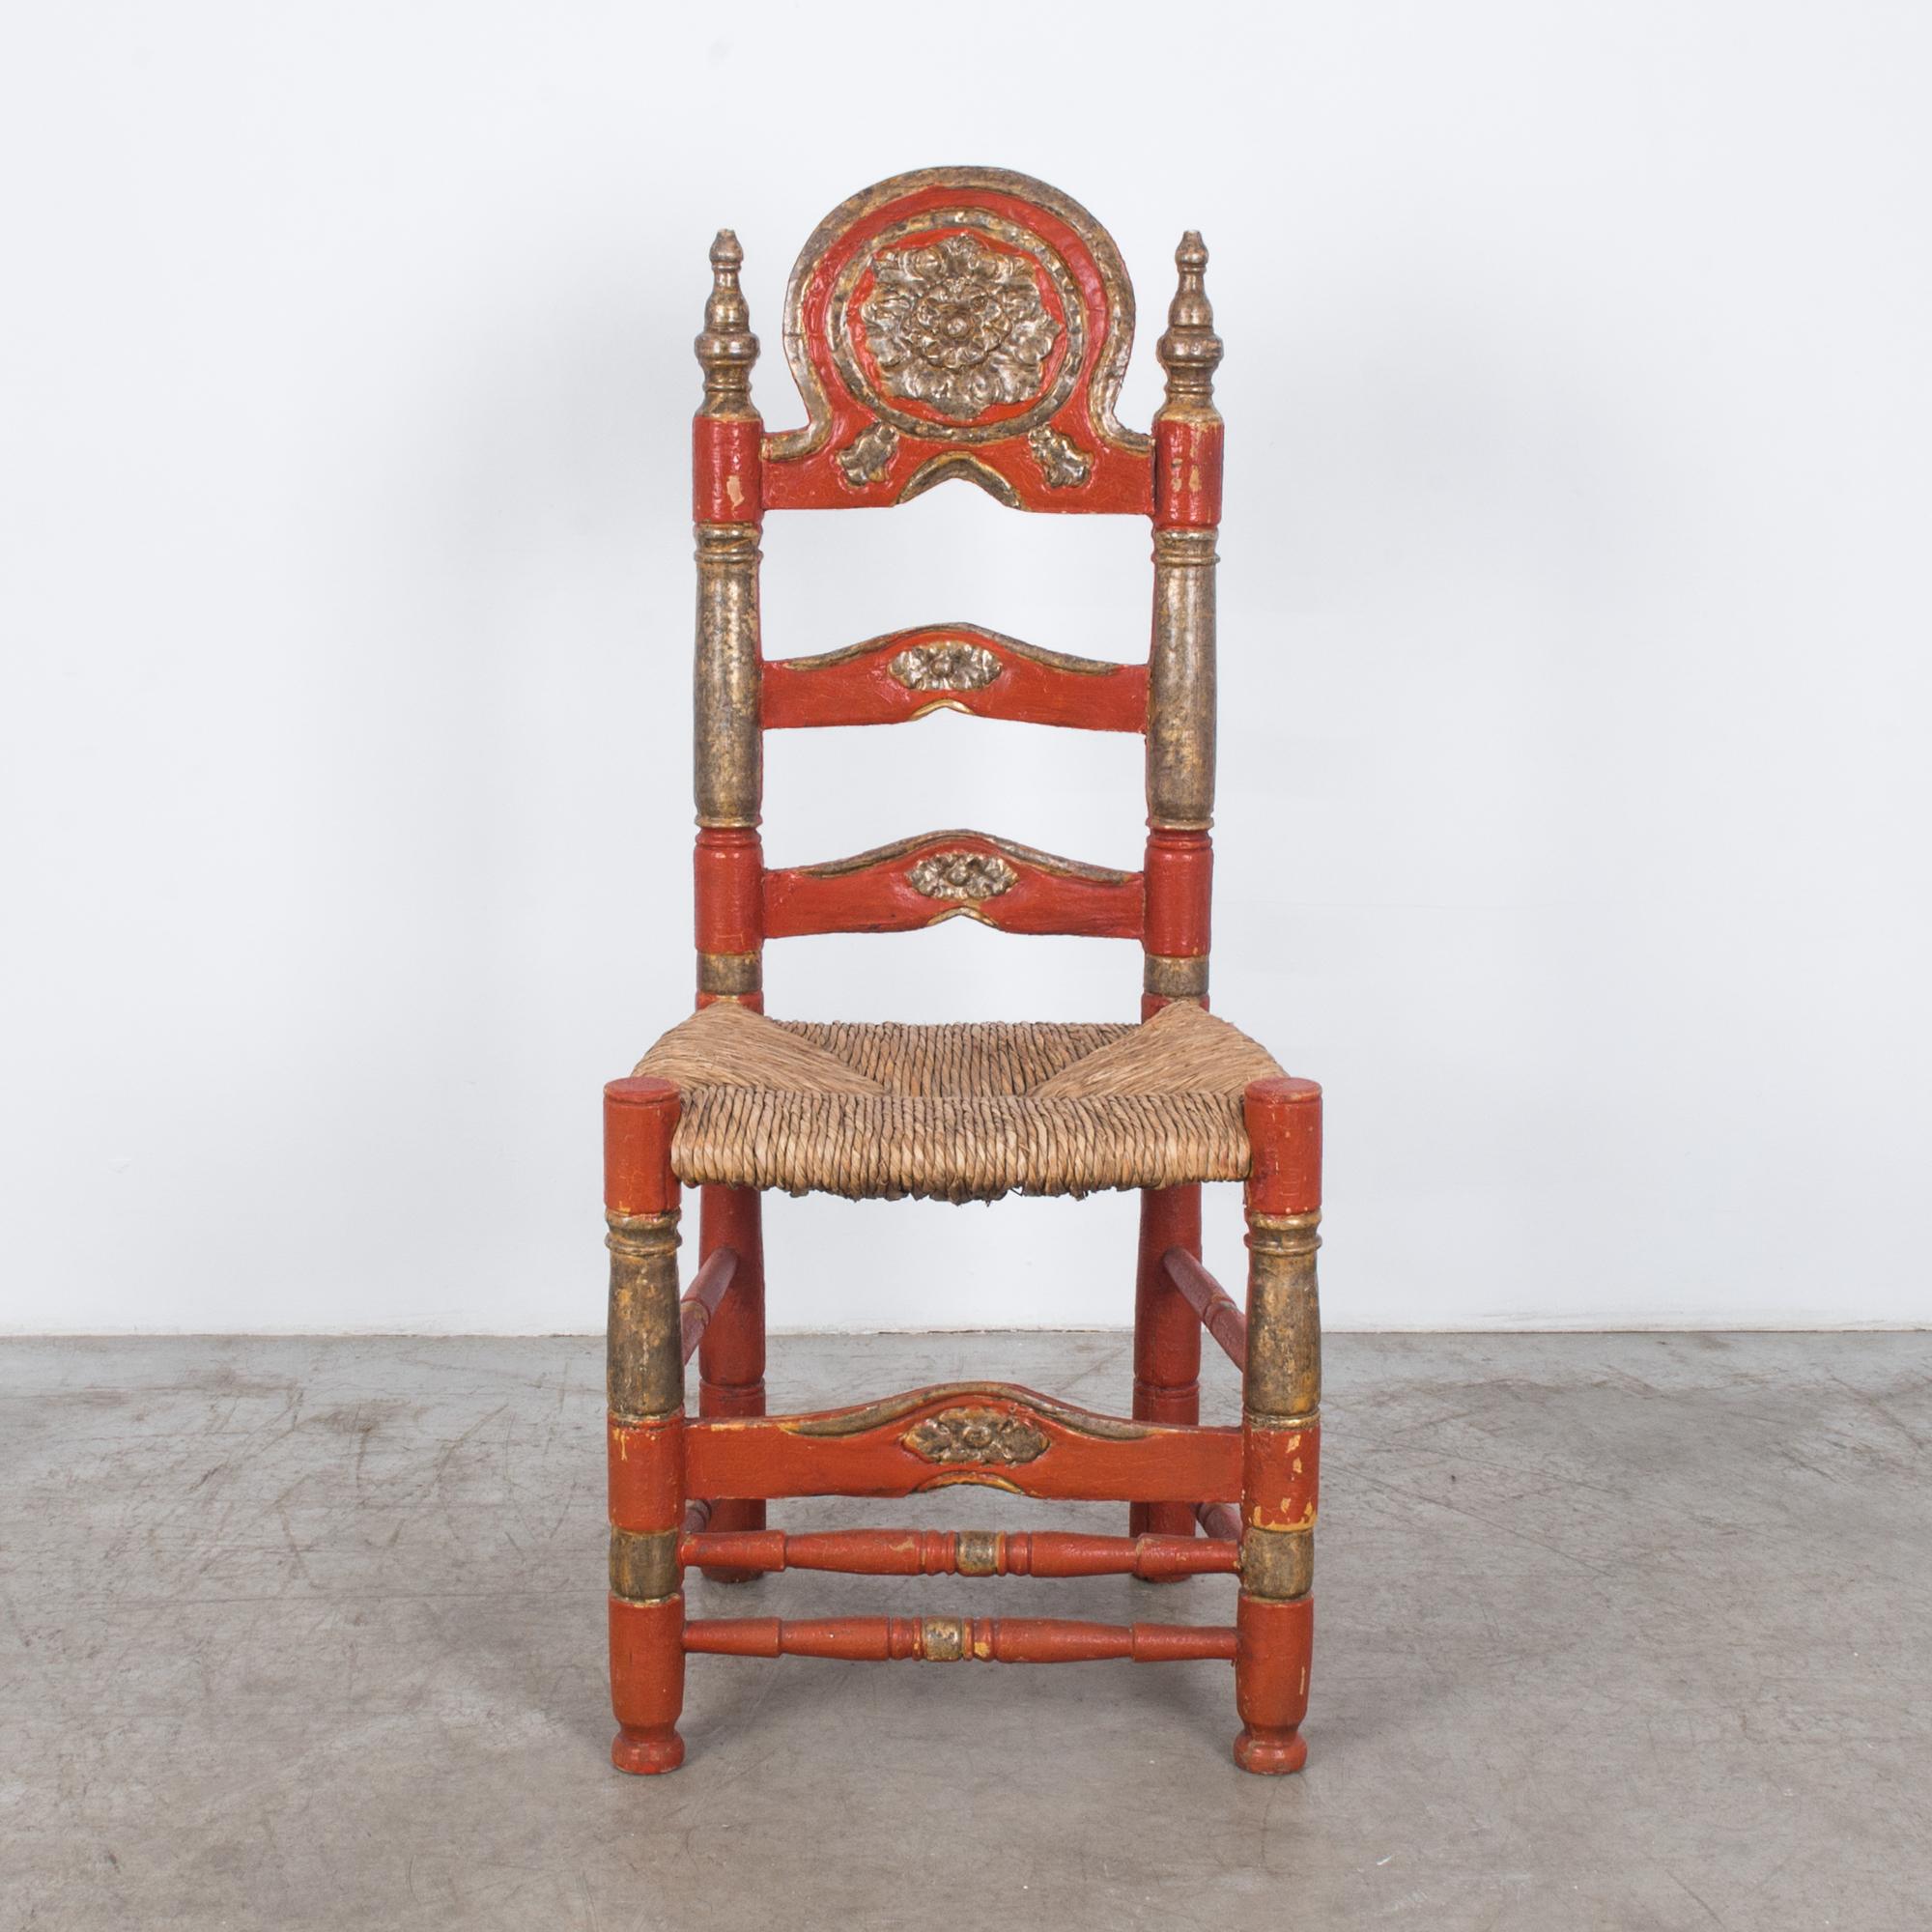 This stunning accent chair with a wicker seat was made in Italy, circa 1960. A rustic throne, large parts of the weathered wooden frame are painted terracotta red. The rear posts are topped with spires, which flank the impressive floral carving on